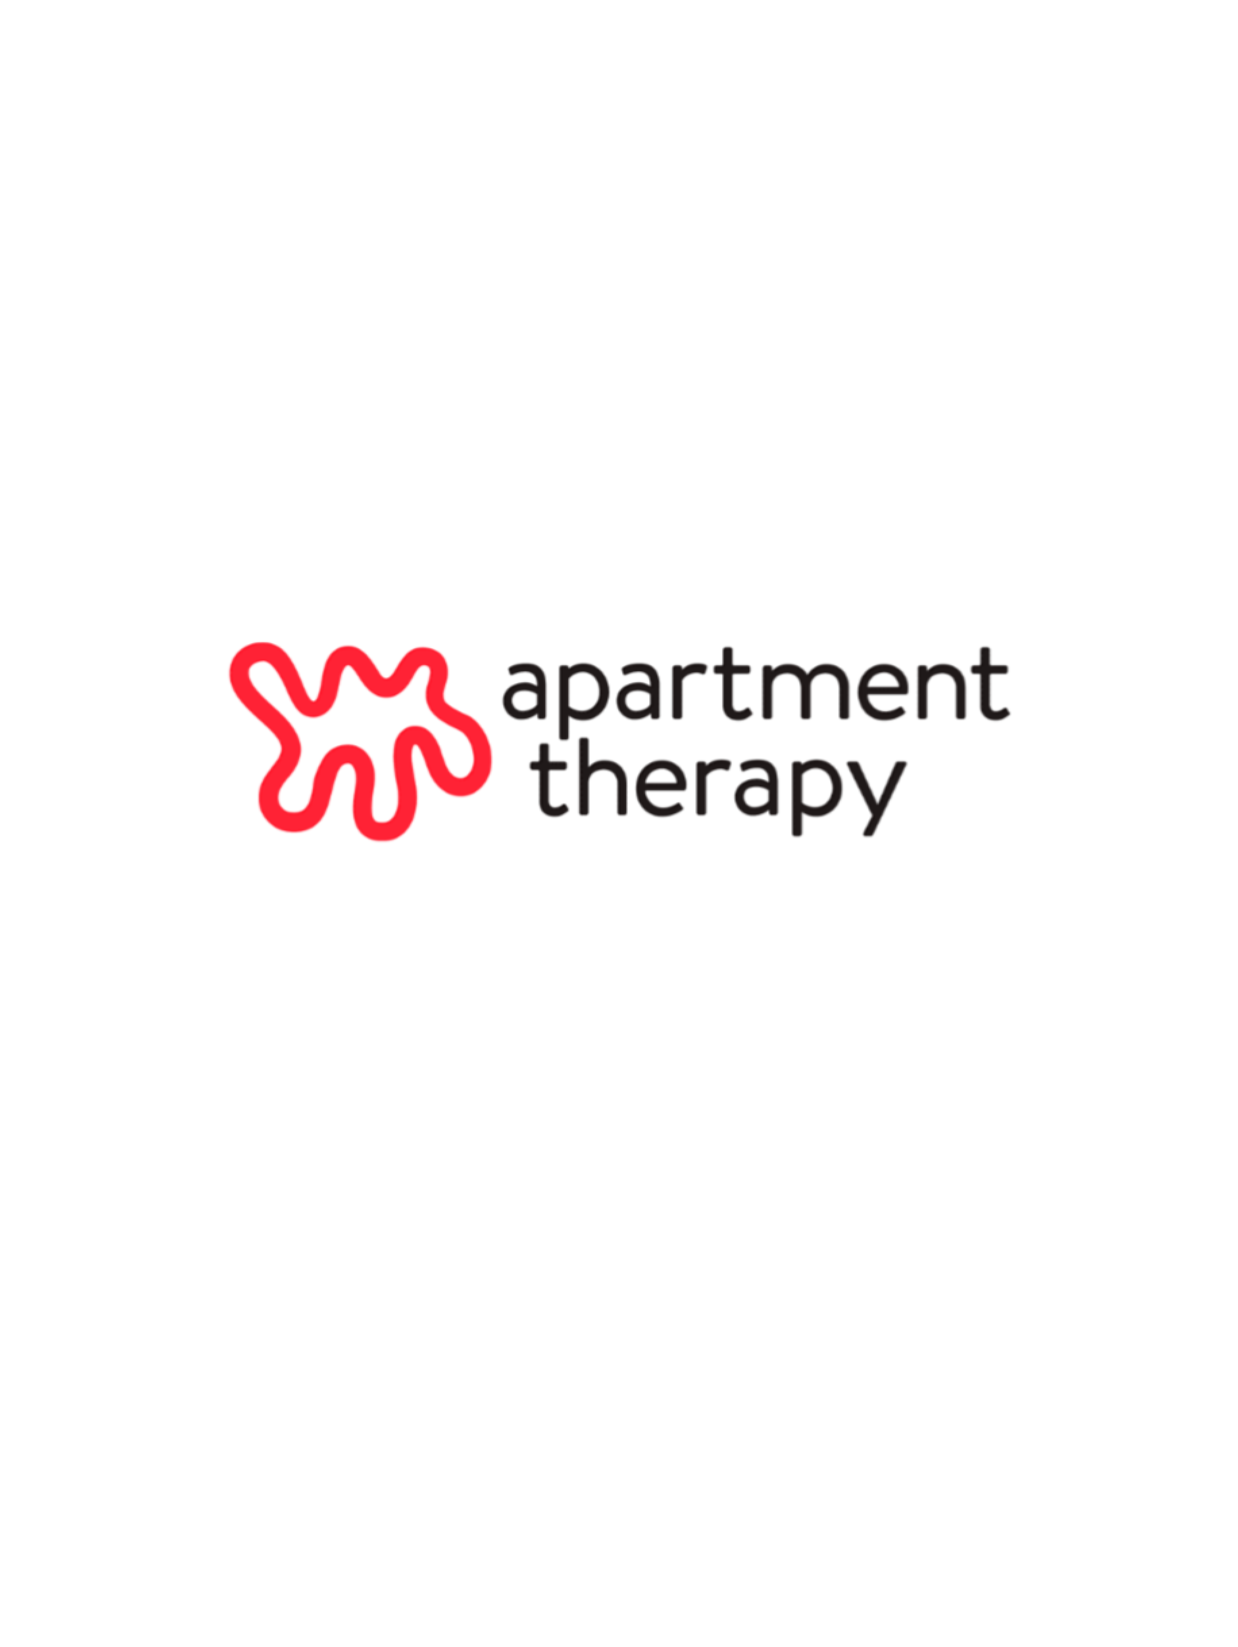 apartment-therapy-logo-1-1.png